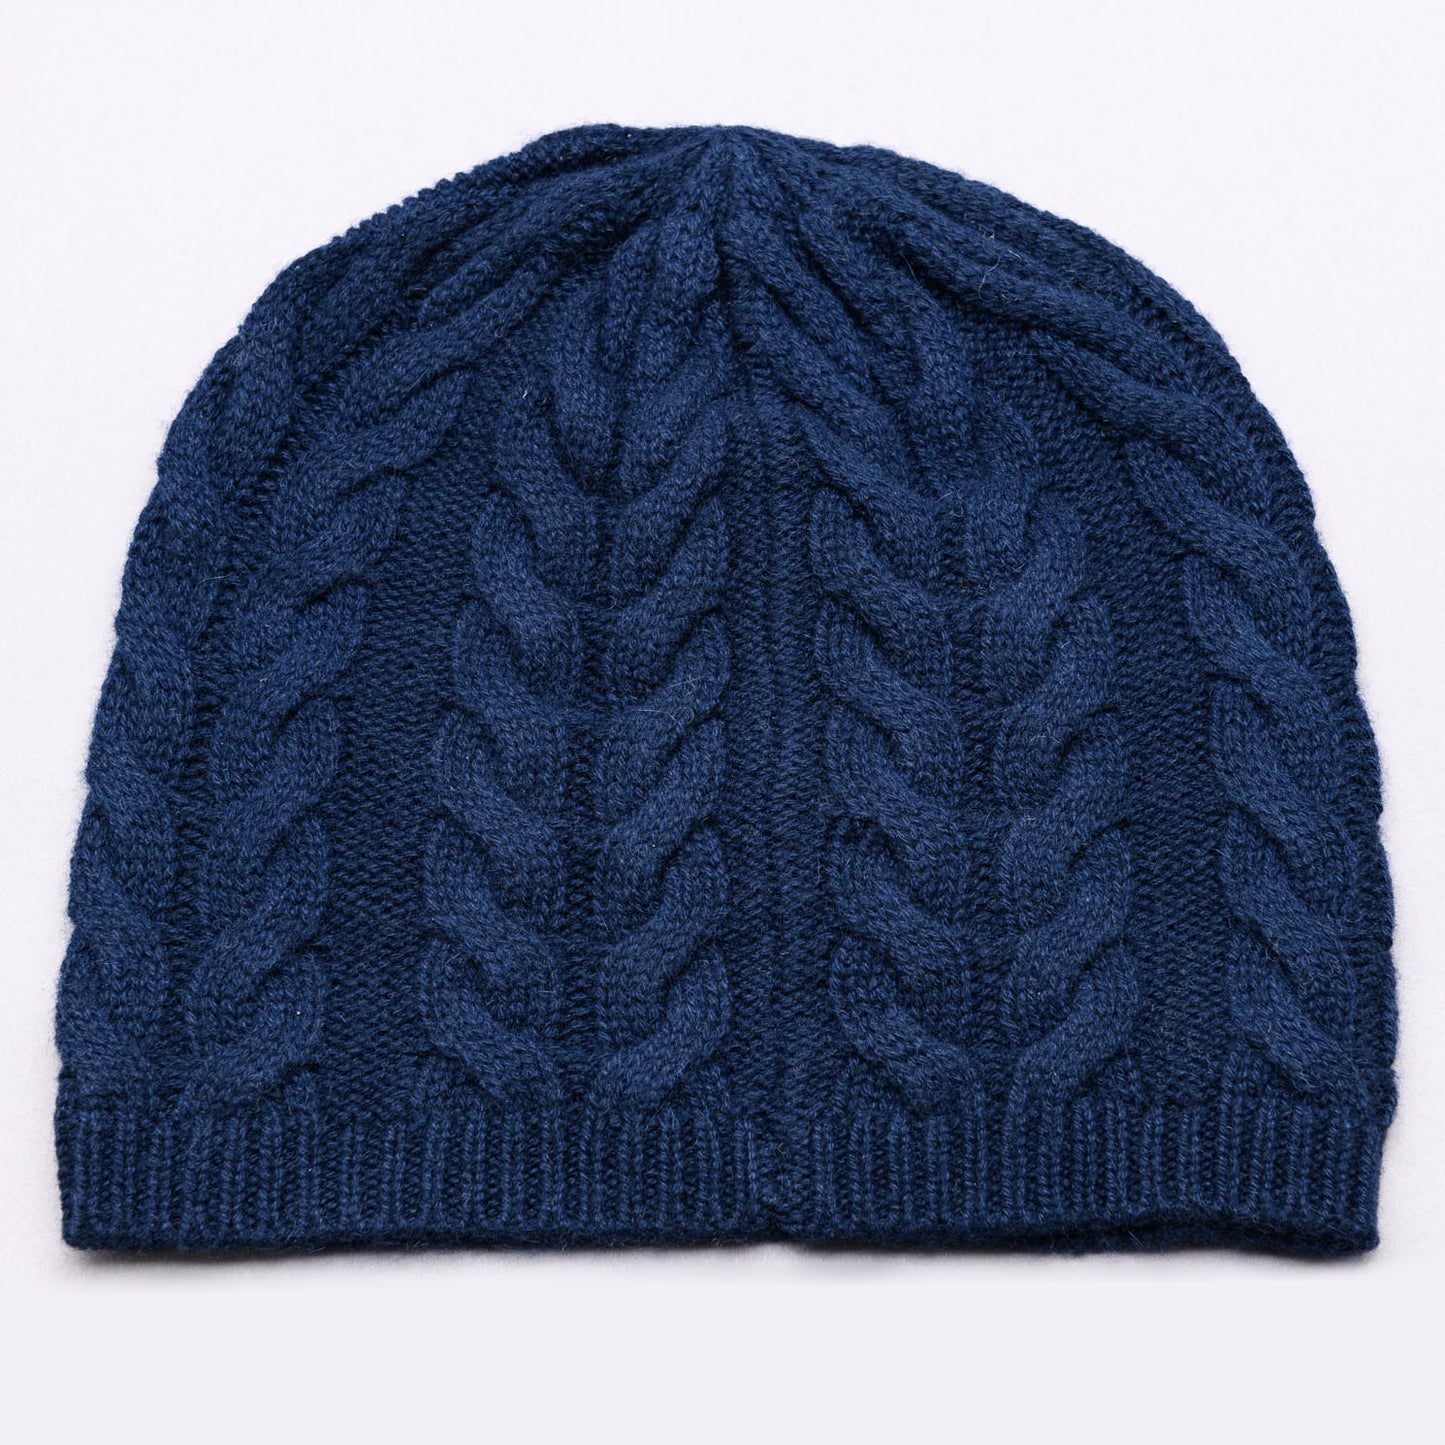 PERCY 100% Pure Cashmere Classic Cable Beanie, French Navy